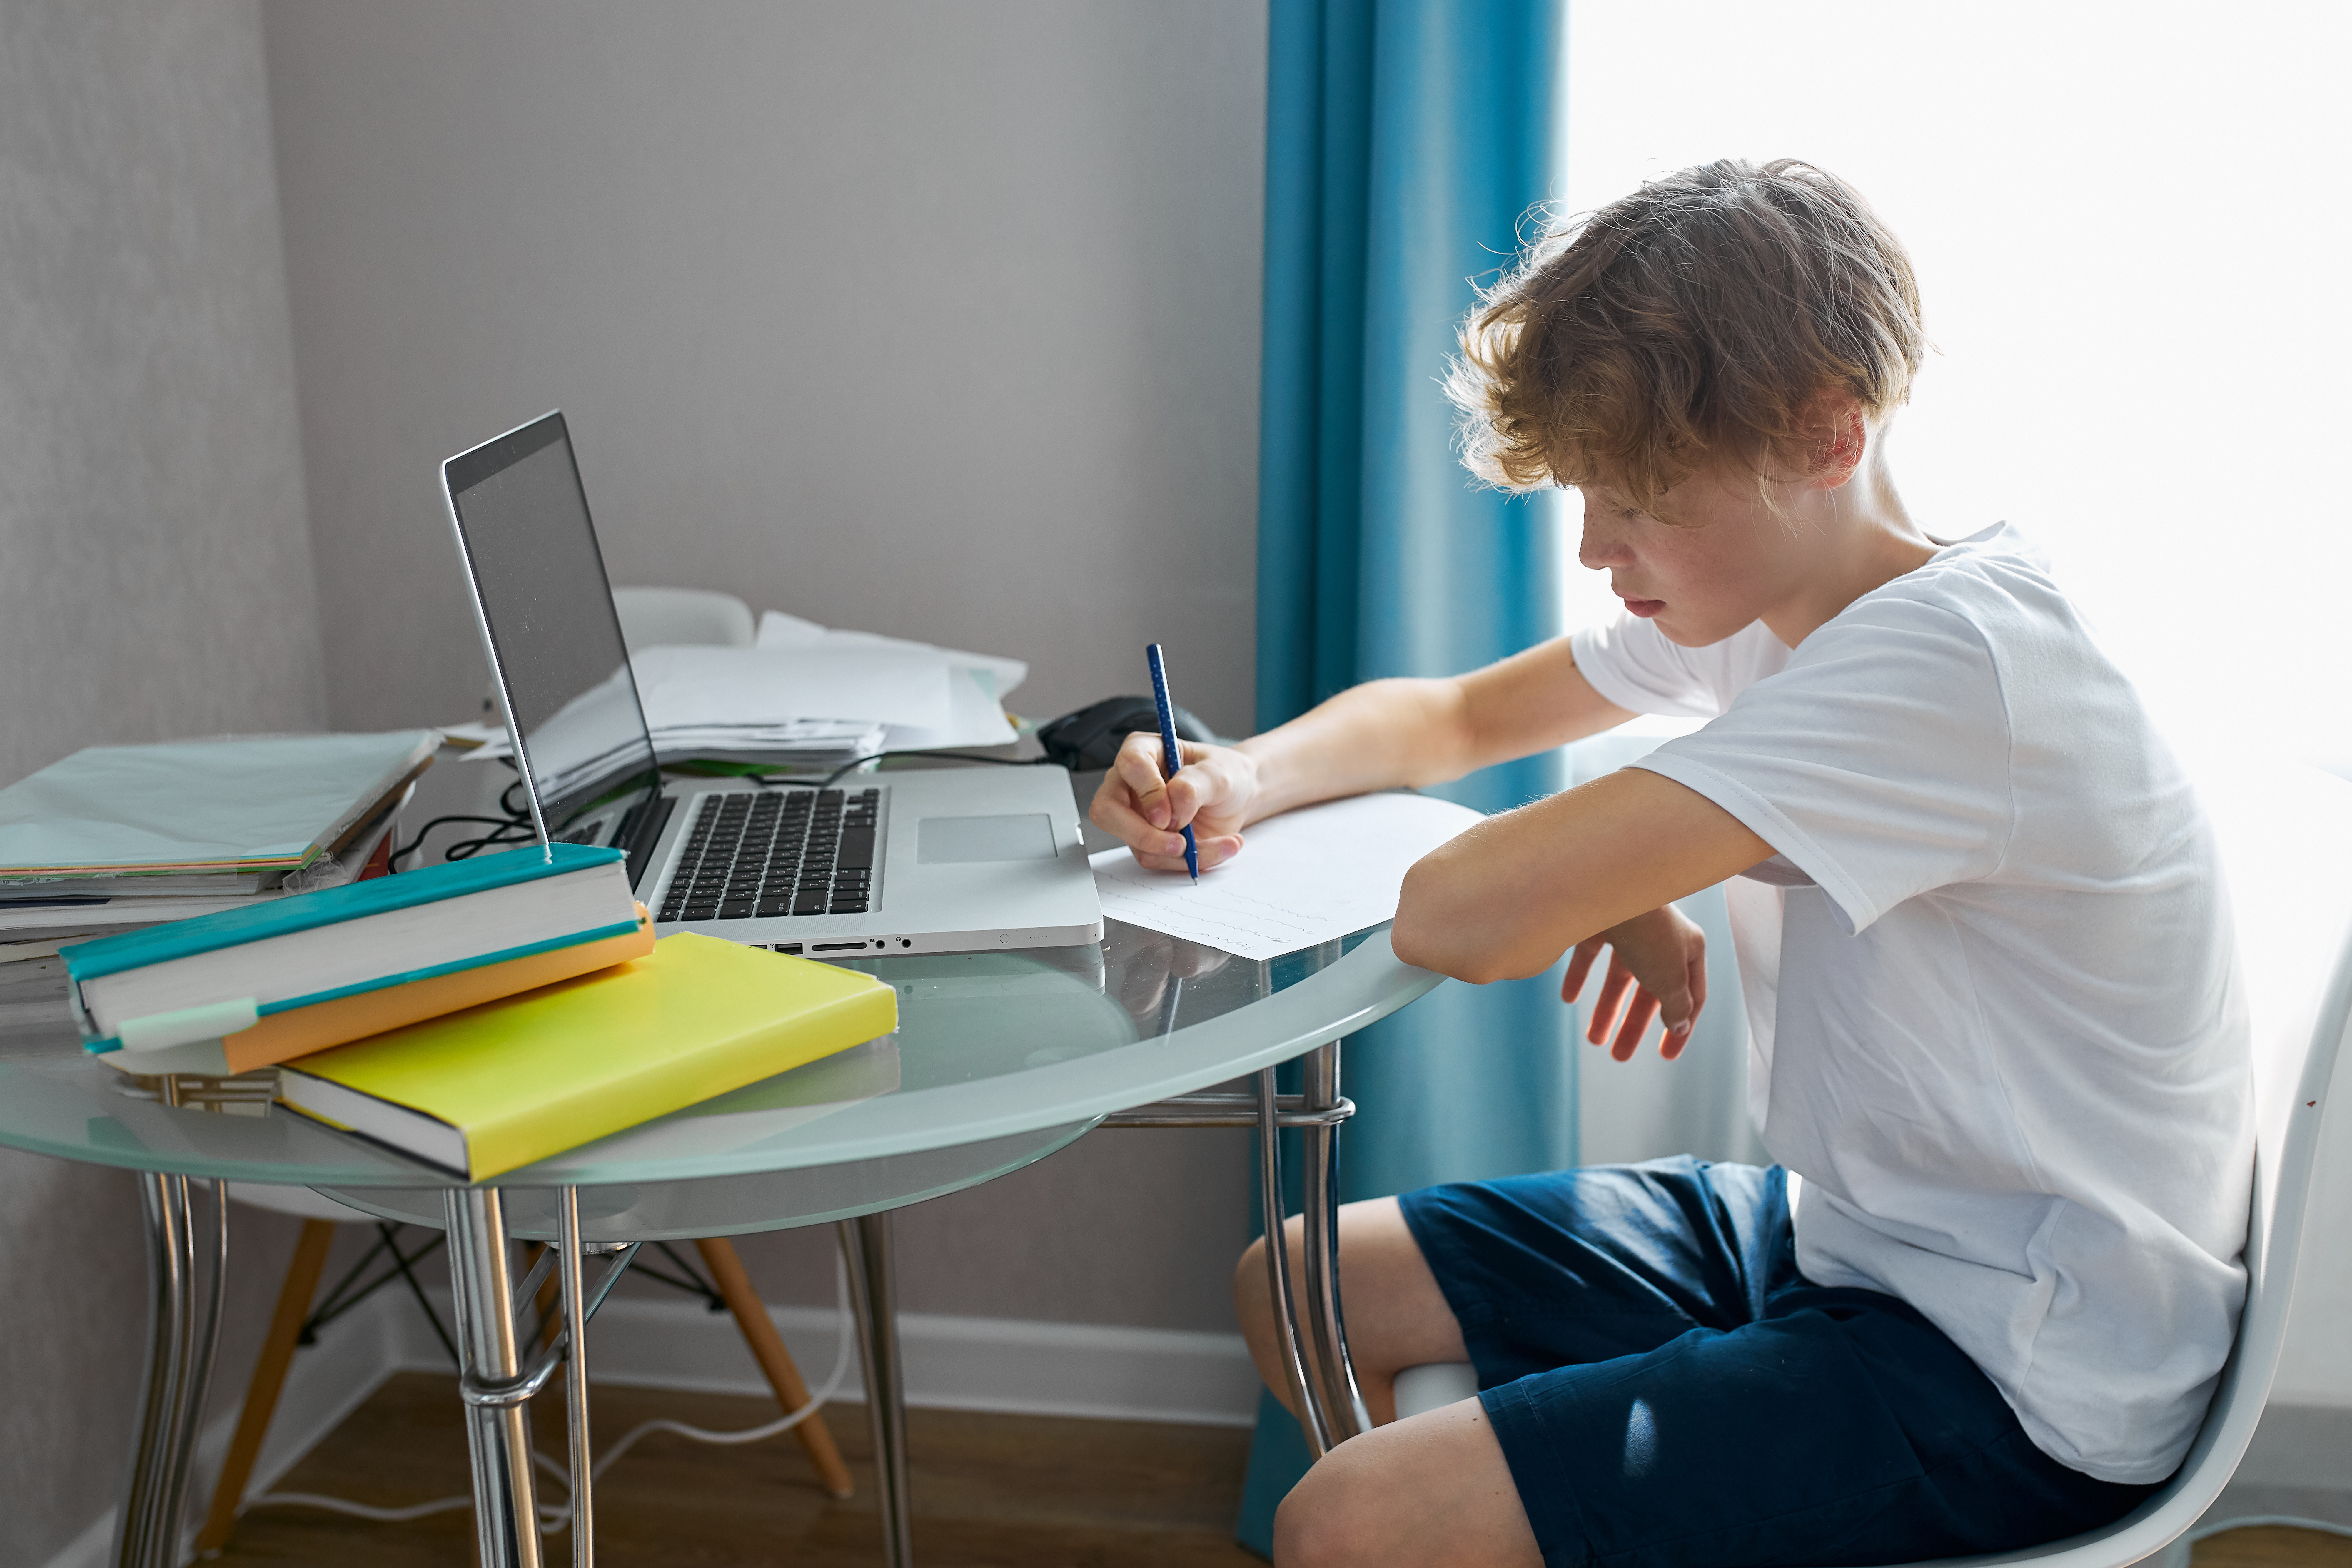 Teenage boy at laptop on dining table